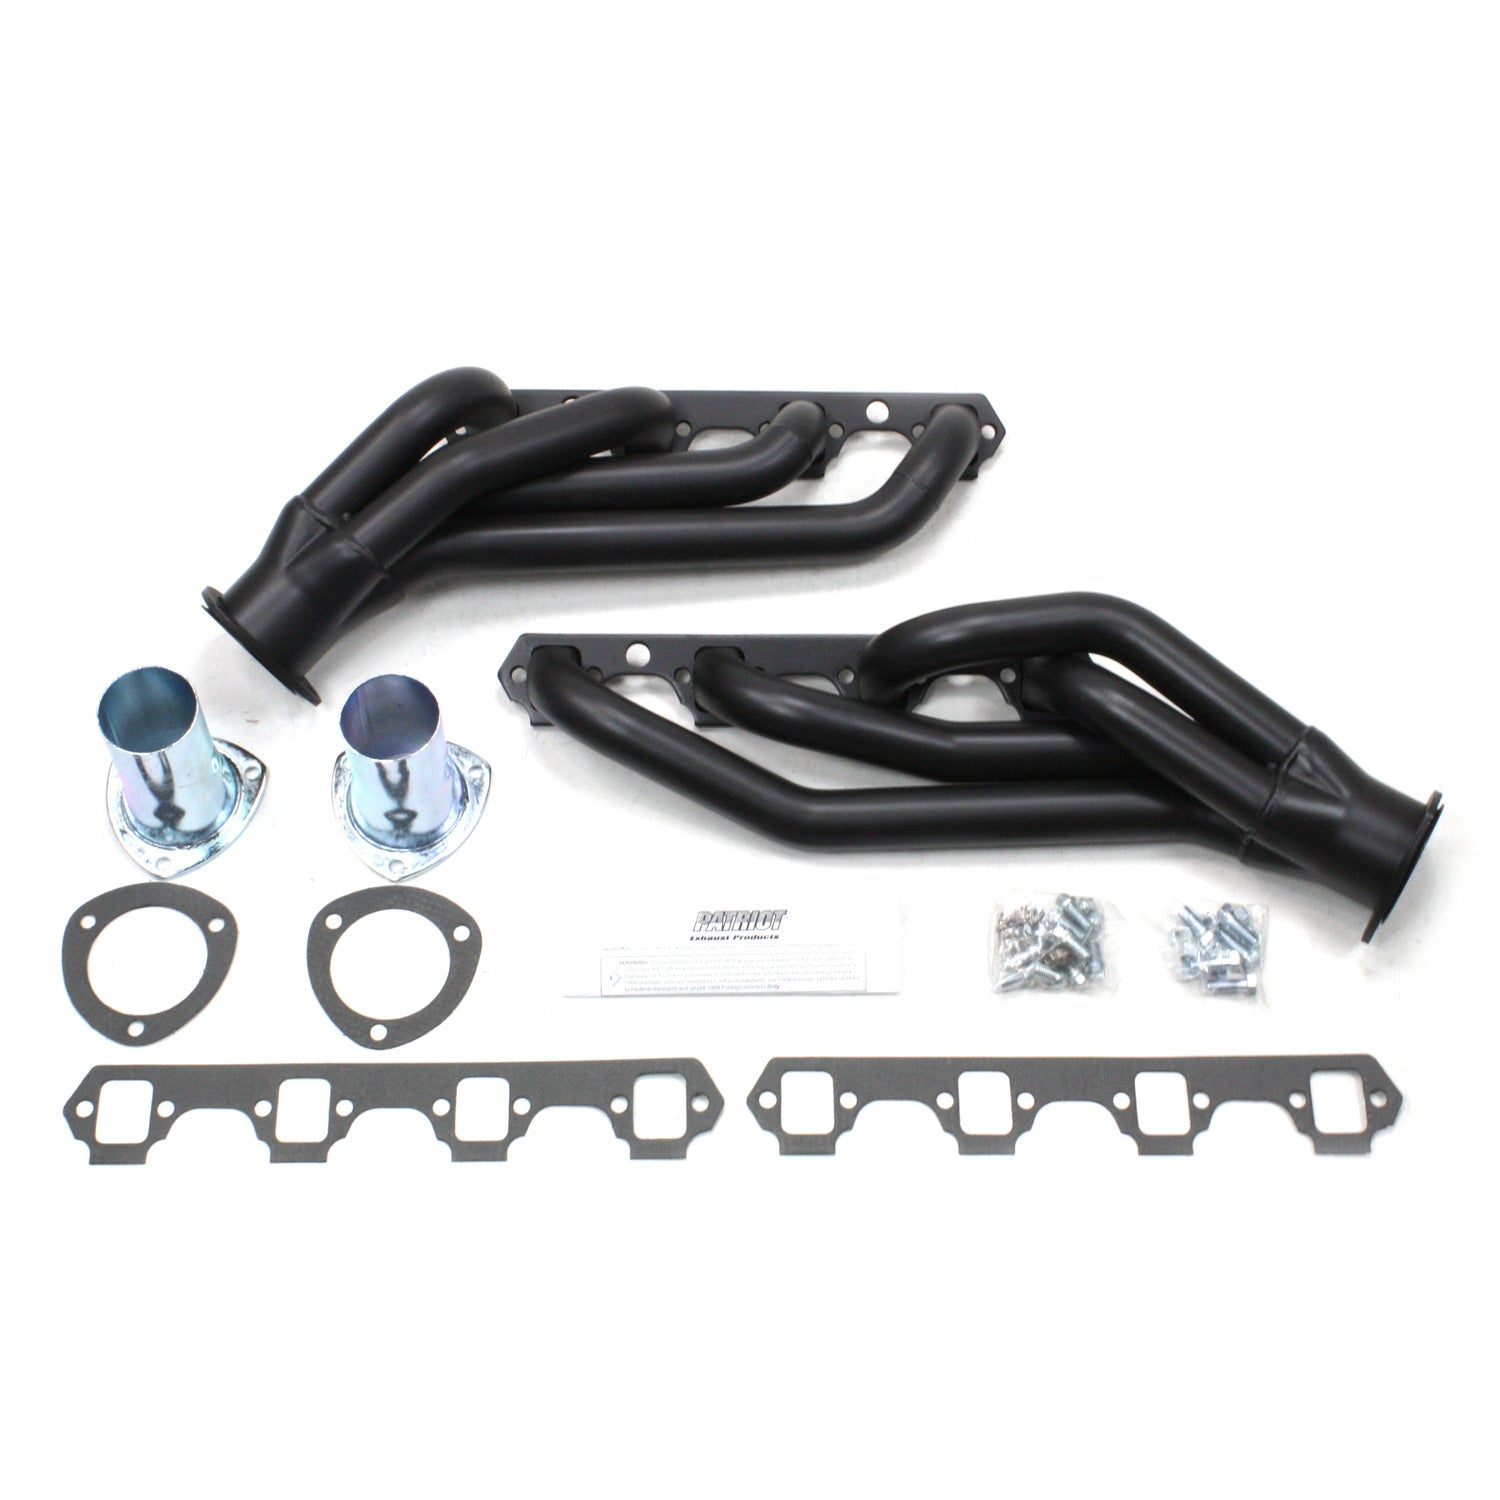 Patriot Exhaust H8433-B 1 5/8" Clippster Header Ford Mustang Small Block Ford 64-73 Hi-Temp Black Coating